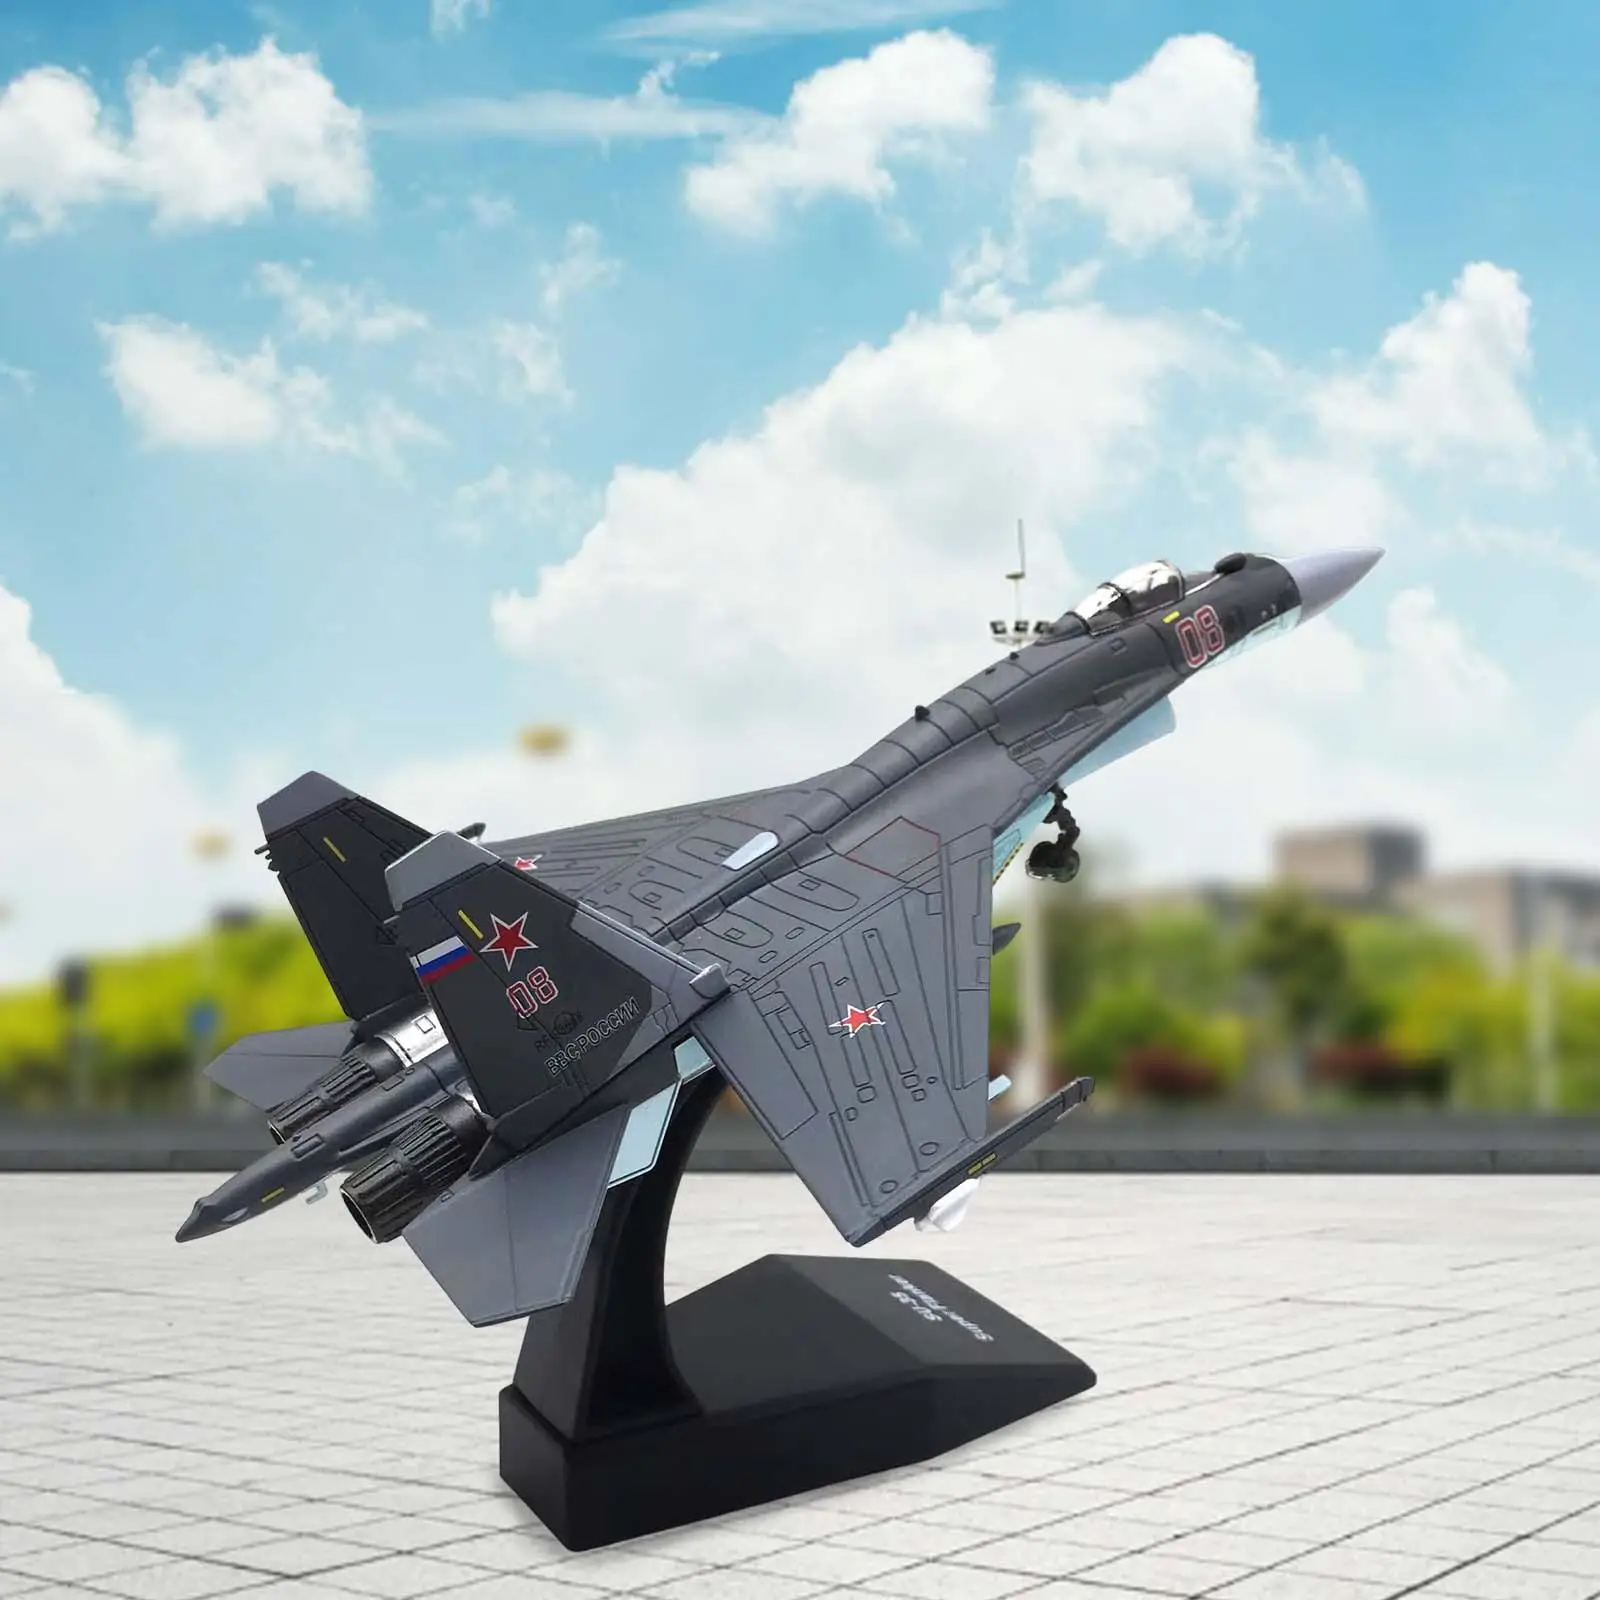 1/100 Russian Plane Model SU-35 Diecast Plane Display Ornaments Fighter Model for Home Cafe Desktop Gift Collectibles